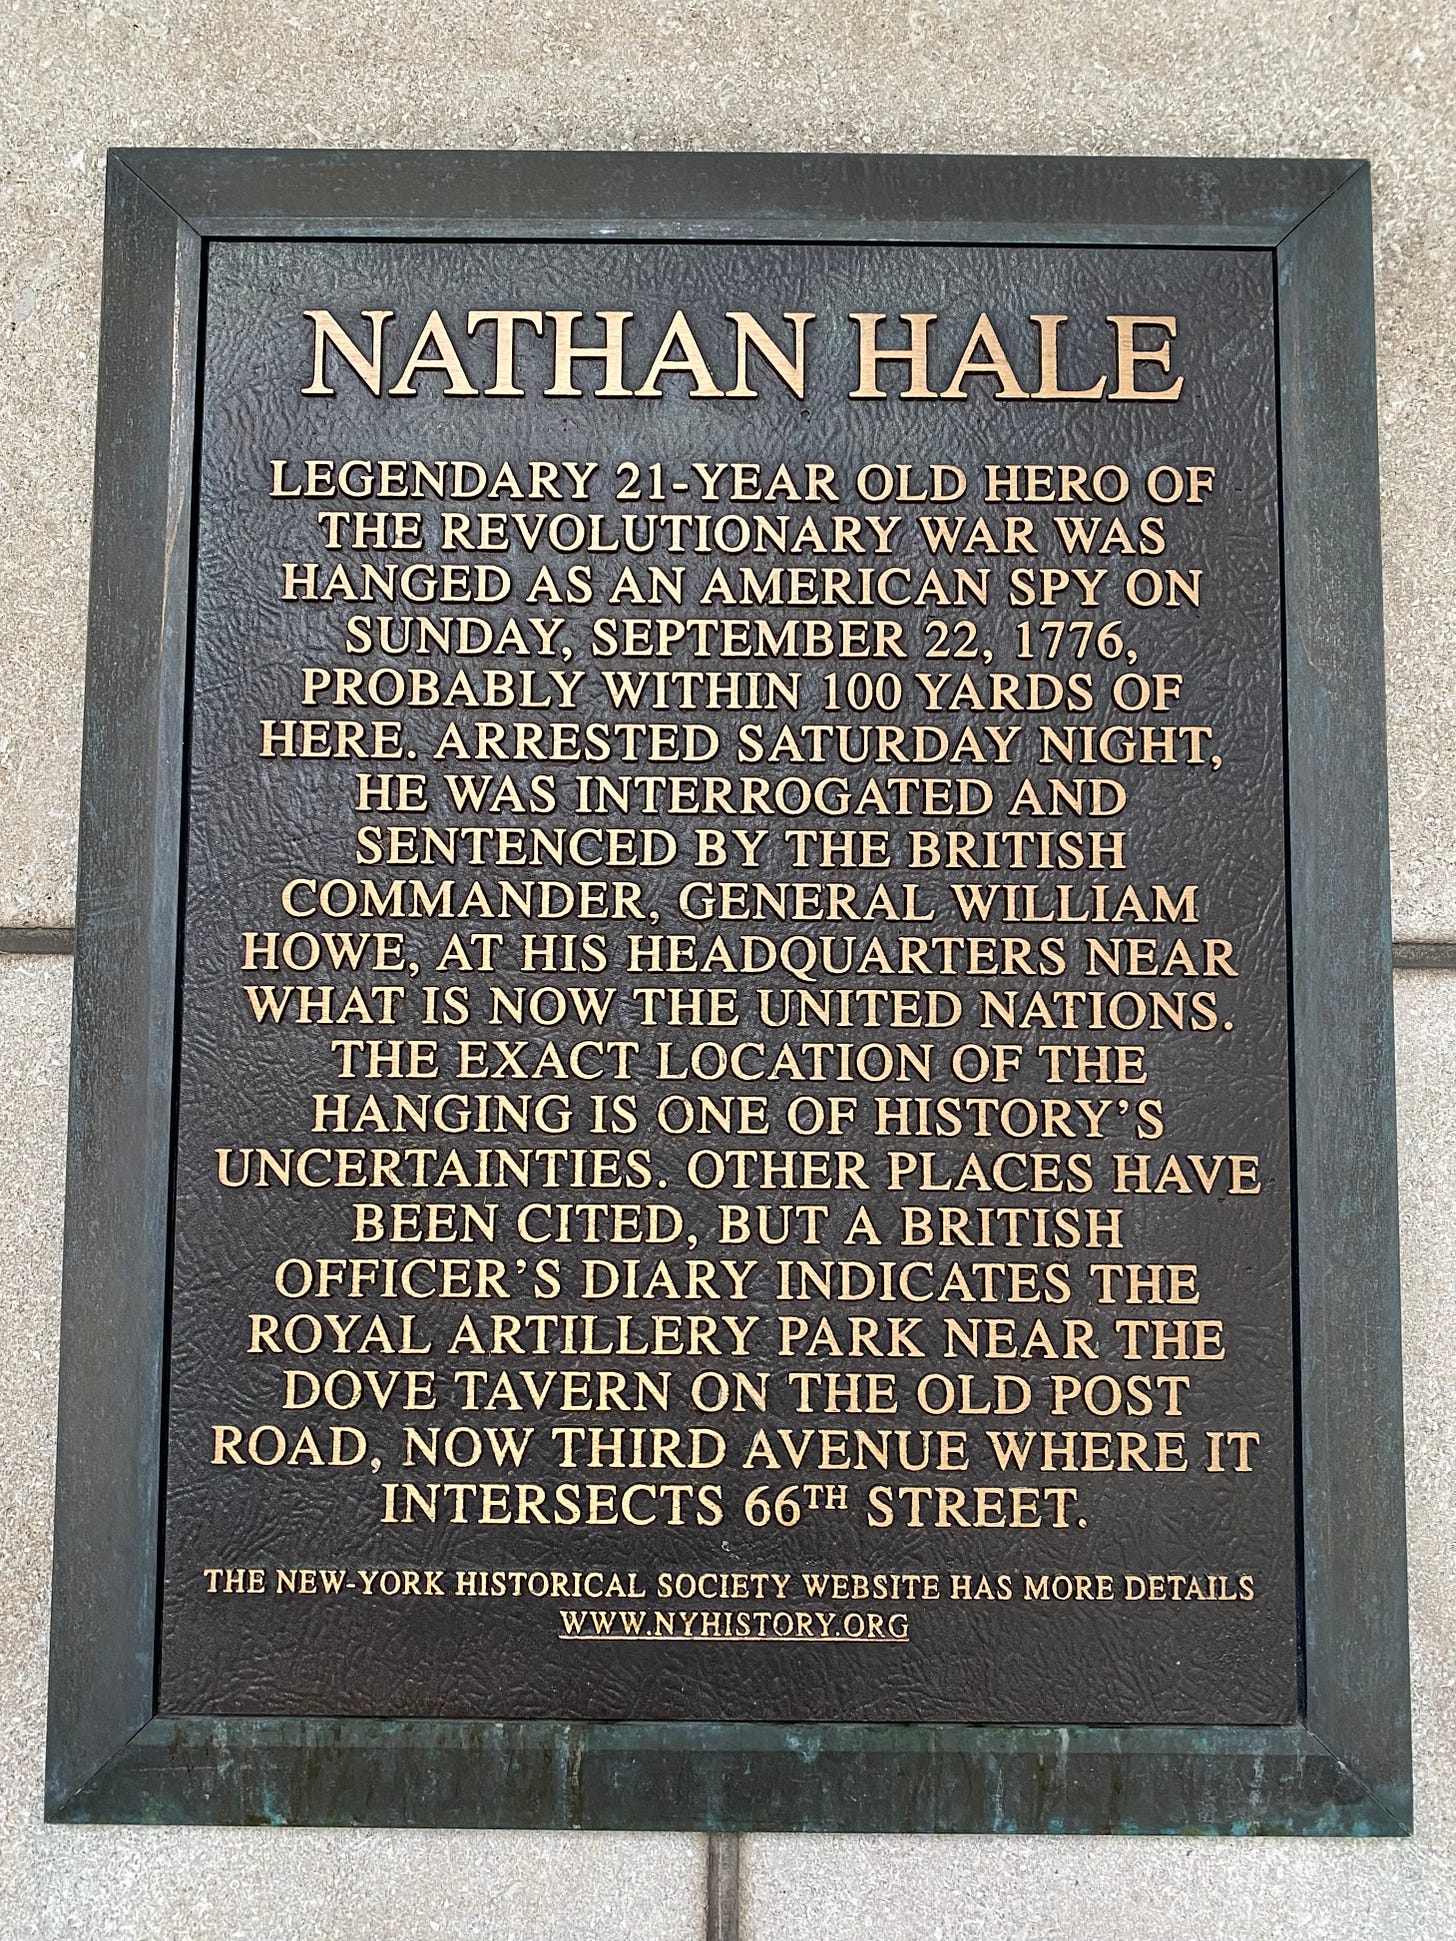 A plaque that reads "NATHAN HALE. Legendary 21-year old hero of the Revolutionary War was hanged as an American spy on Sunday, September 22nd 1776, probably within 100 years of here. Arrested Saturday night, he was interrogated and sentenced by the British commander, General William Howe, at his headquarters near what is now the United Nations. The exact location of the hanging is one of history's uncertainties. Other places have been cited, but a British officer's diary indicates the Royal Artillery Park near the Dove Tavern on the Old Post Road, now Third Avenue where it intersects 66th Street. The New-York Historical Society website has more details www.nyhistory.org"